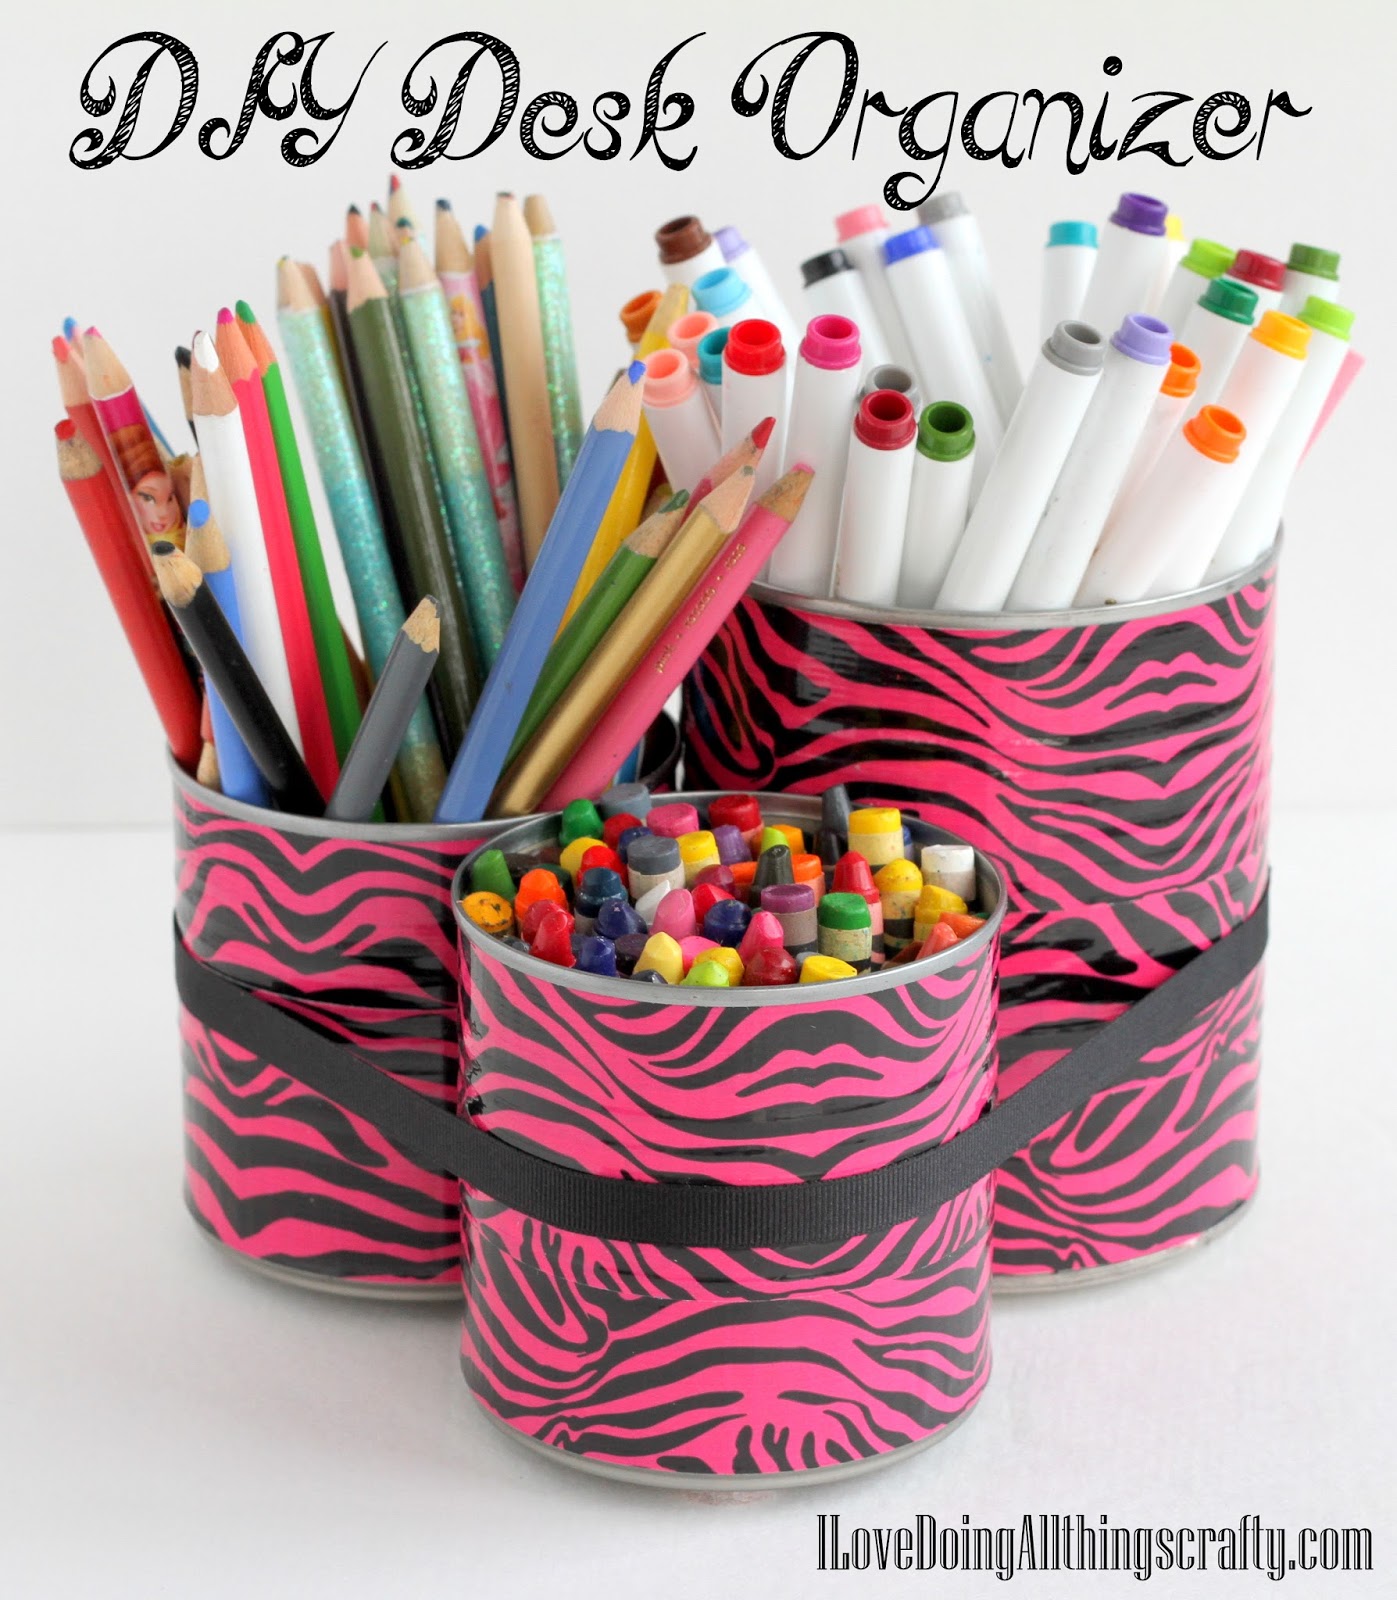 I Love Doing All Things Crafty: DIY Desk Organizers